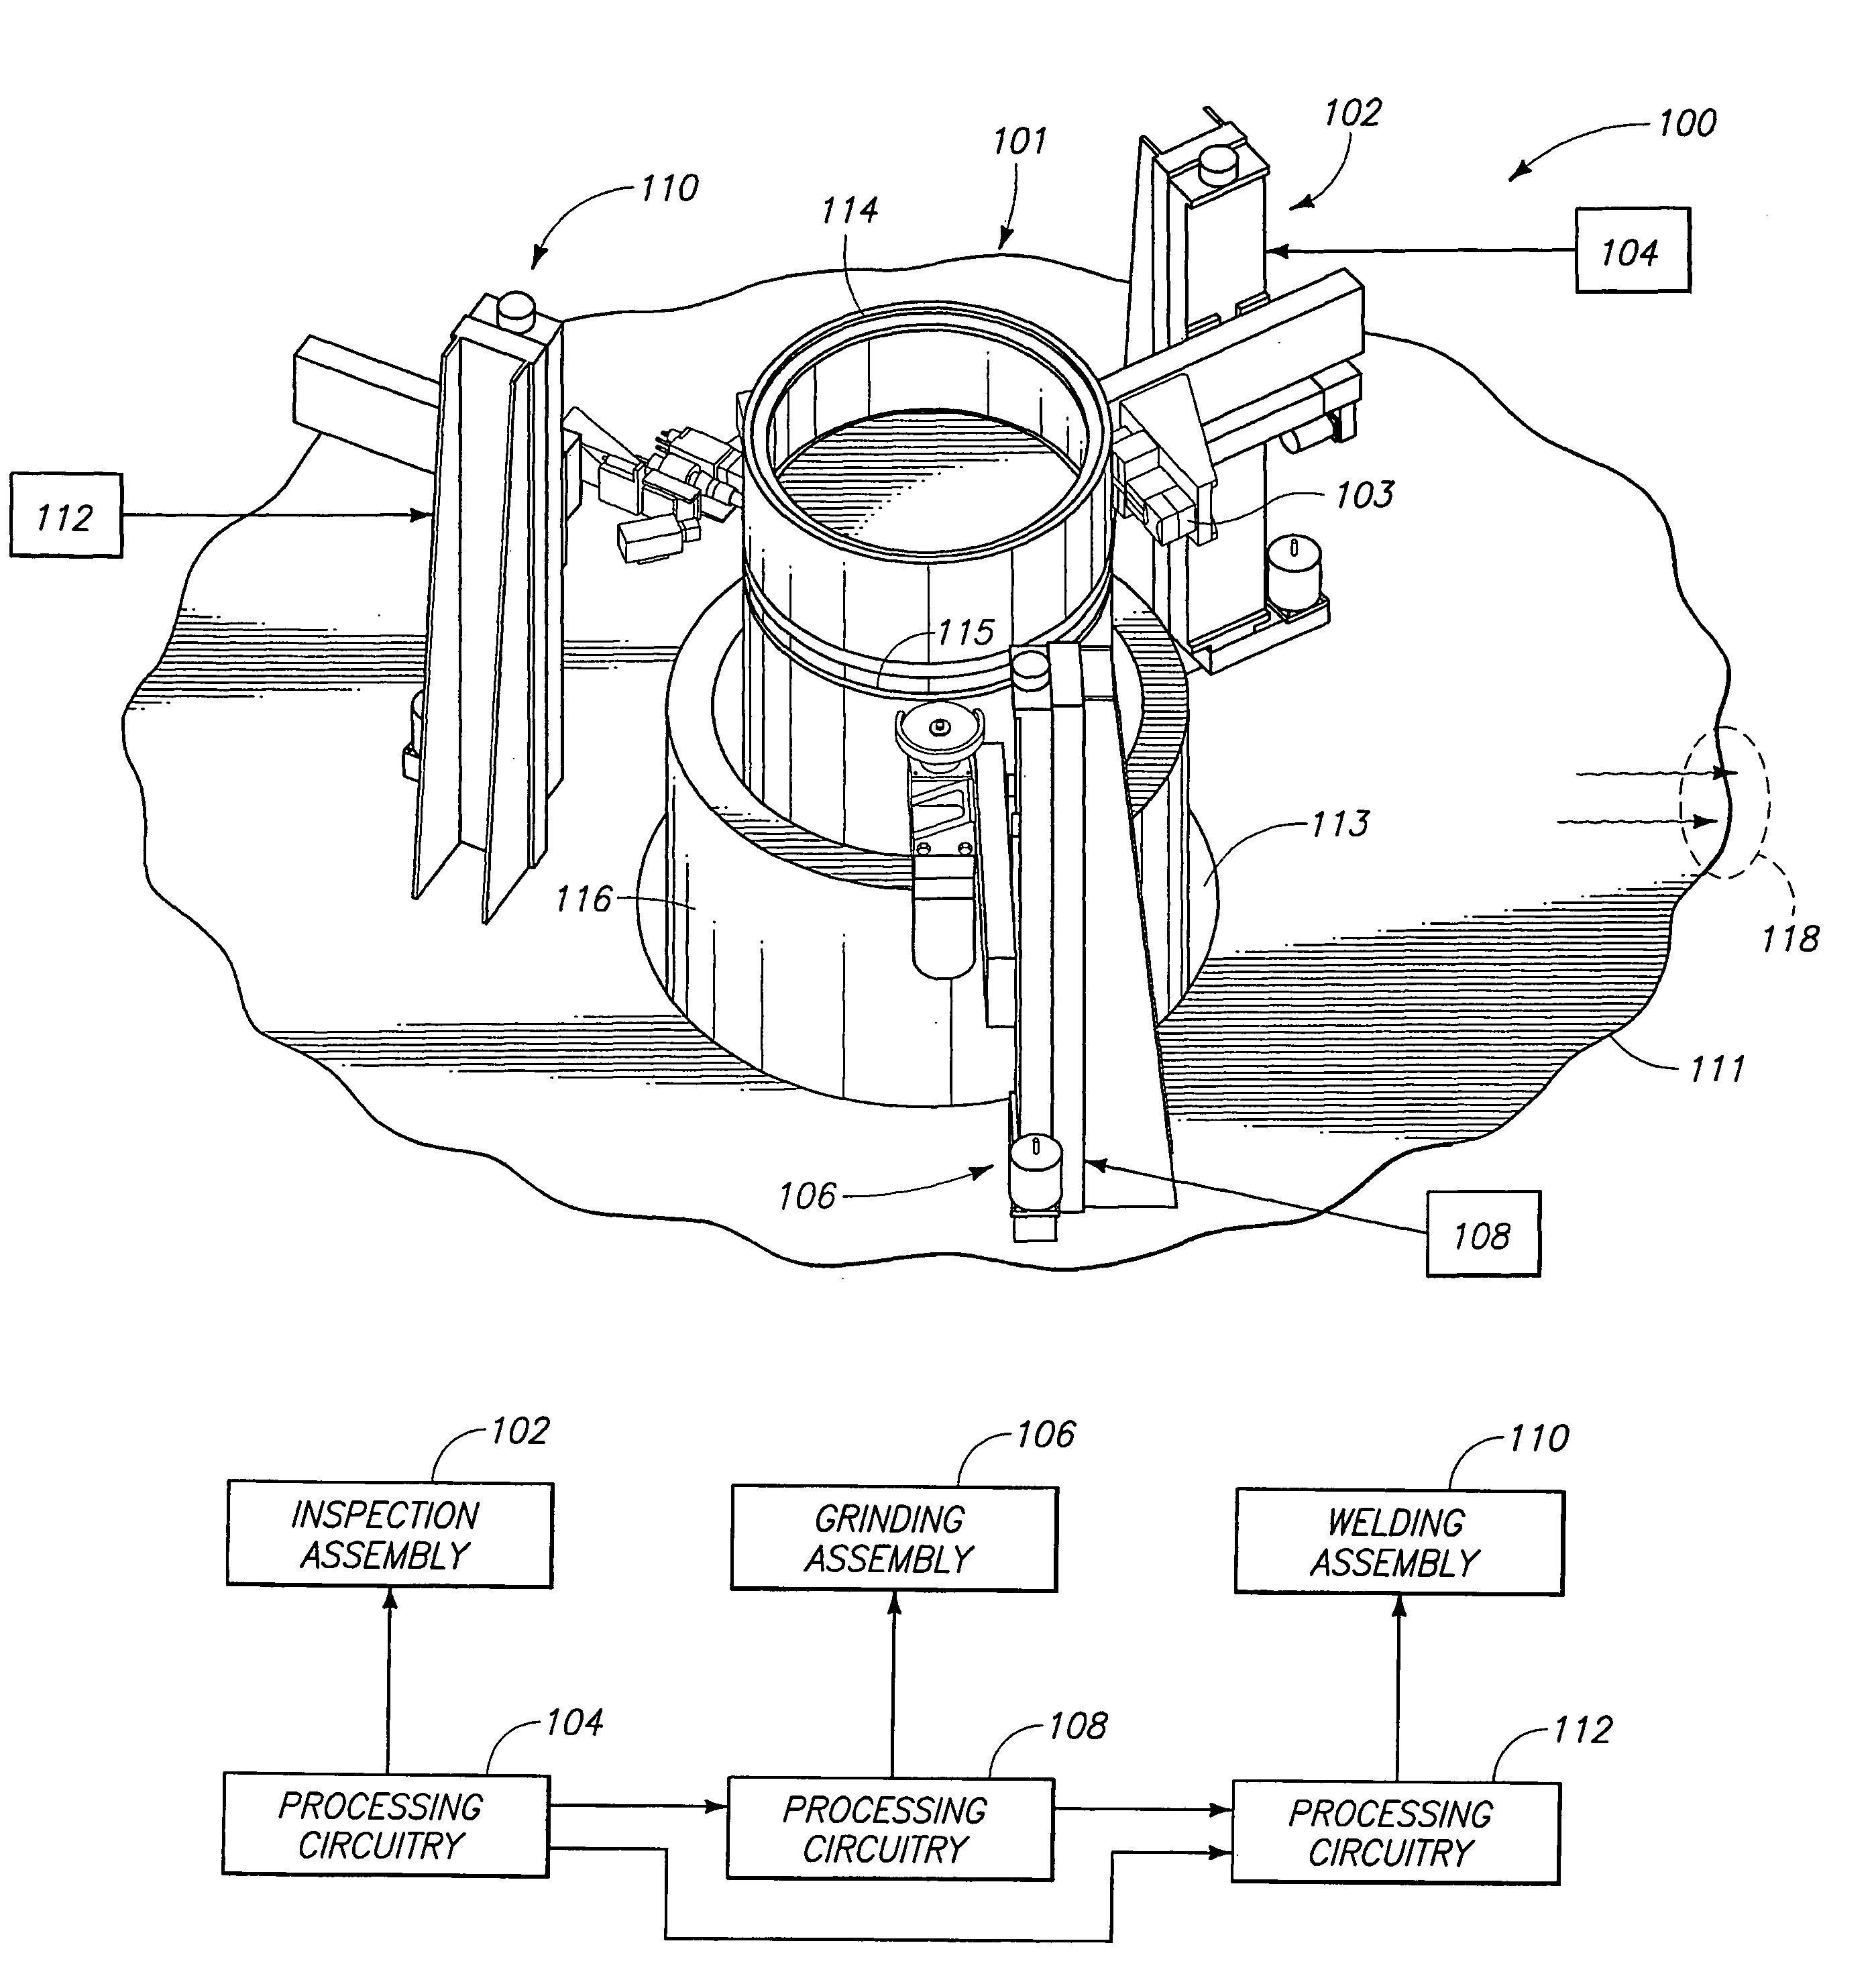 Grinding assembly, grinding apparatus, weld joint defect repair system, and methods